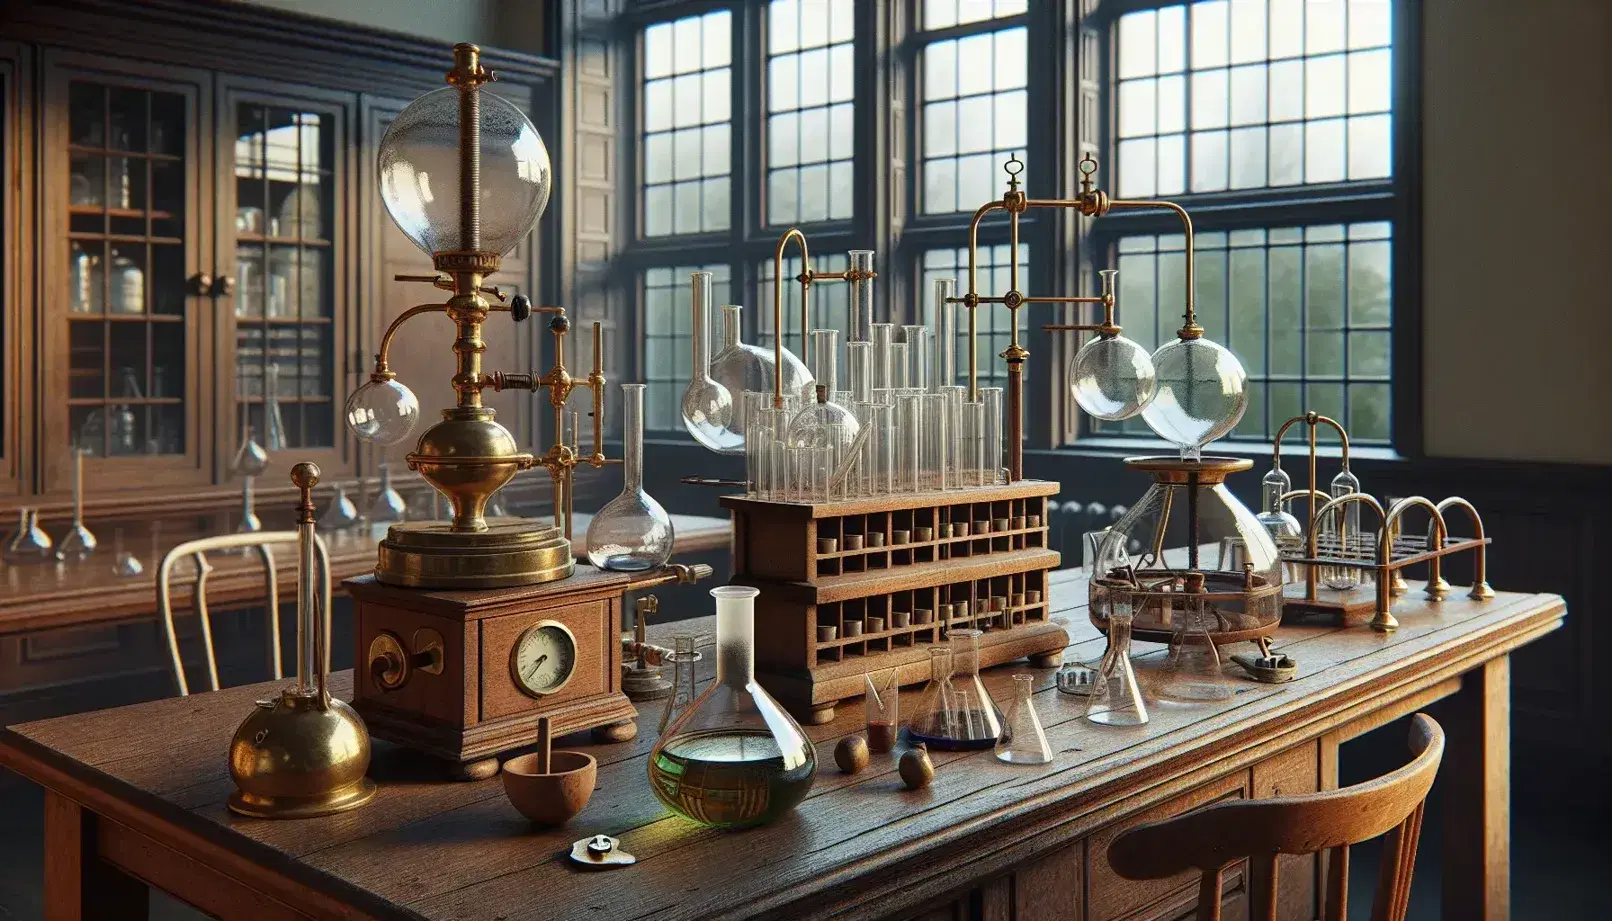 19th century laboratory with brass scales, laboratory glassware, Bunsen burner and porcelain mortar on wooden bench under bright window.